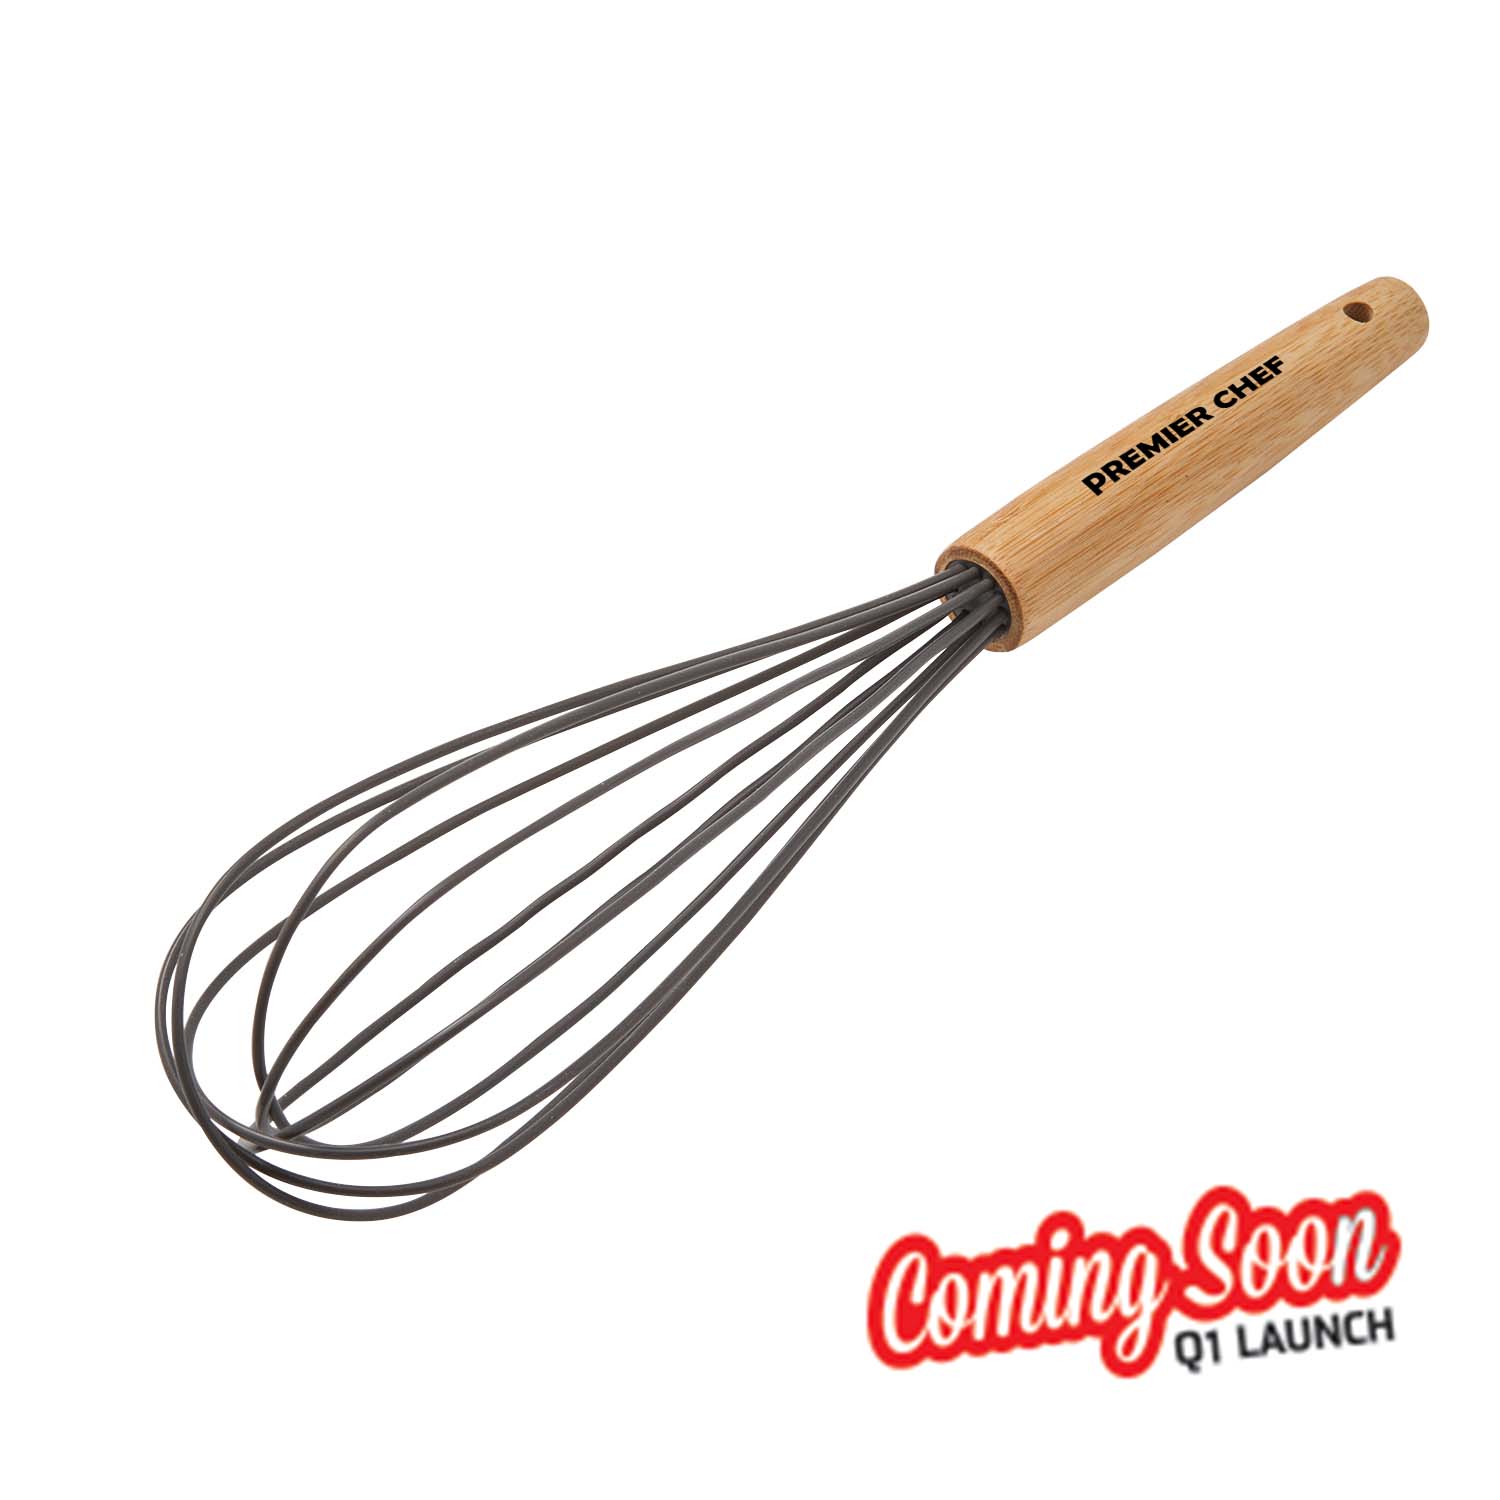 Silicon Whisk with Bamboo Handle